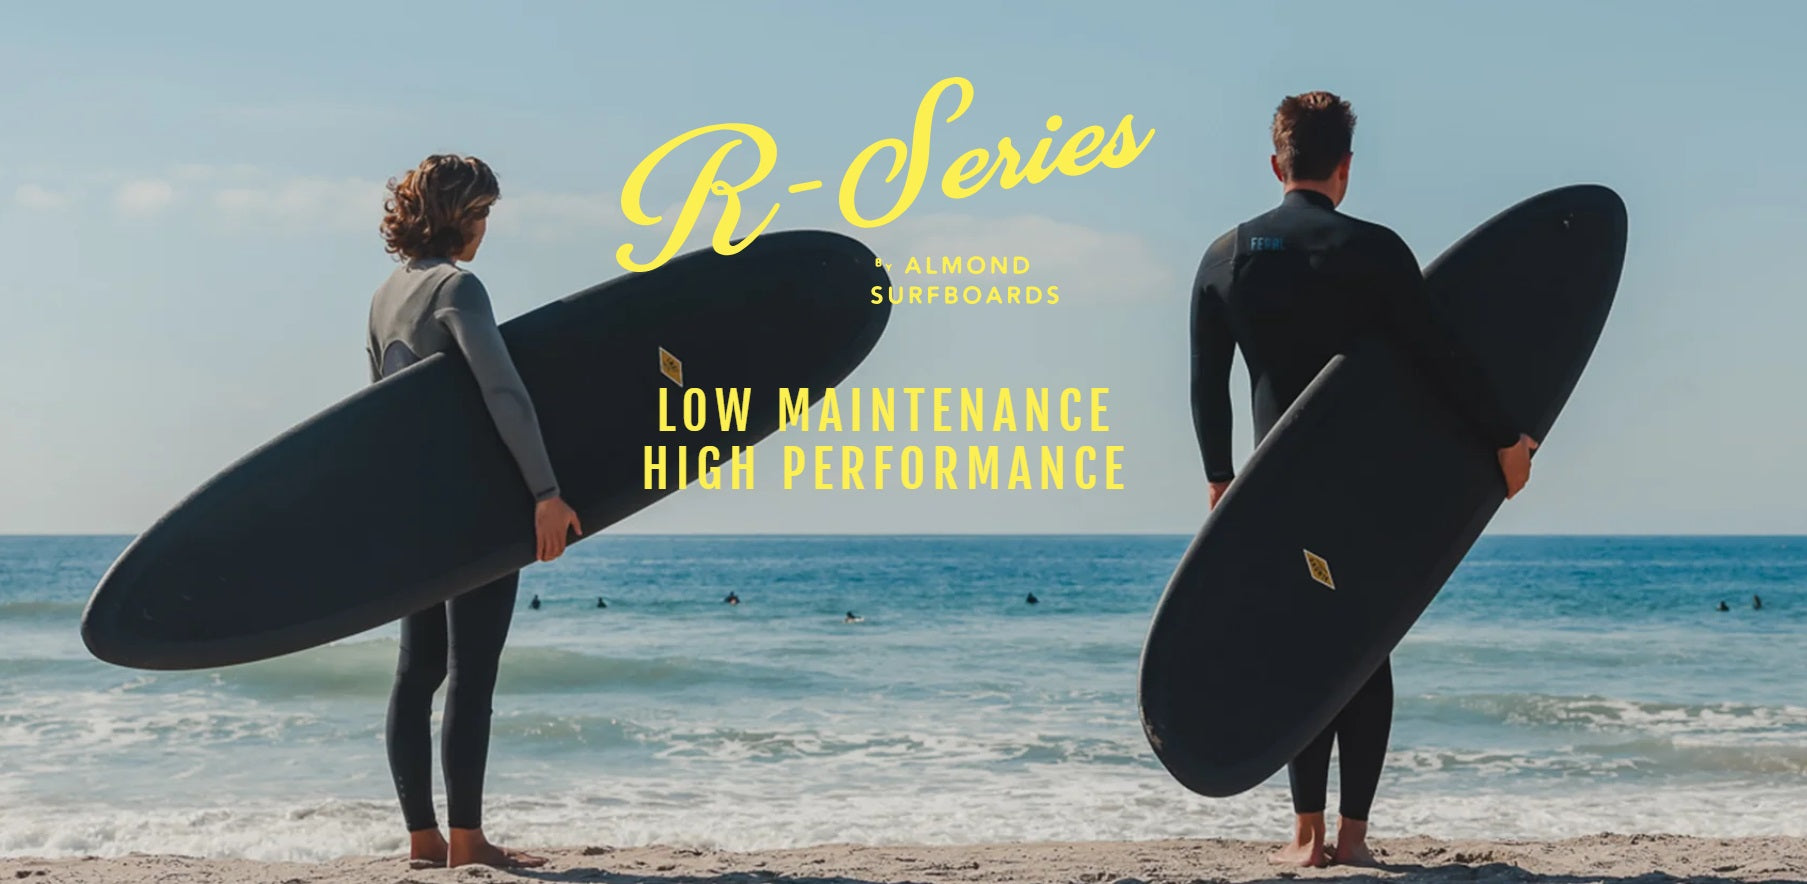 Almond Surfboards R-Series Recyclable Closed-Cell Foam Affordable and Durable Surfboards. Two adults are standing on the beach with their Almond R-Series Surfboards.